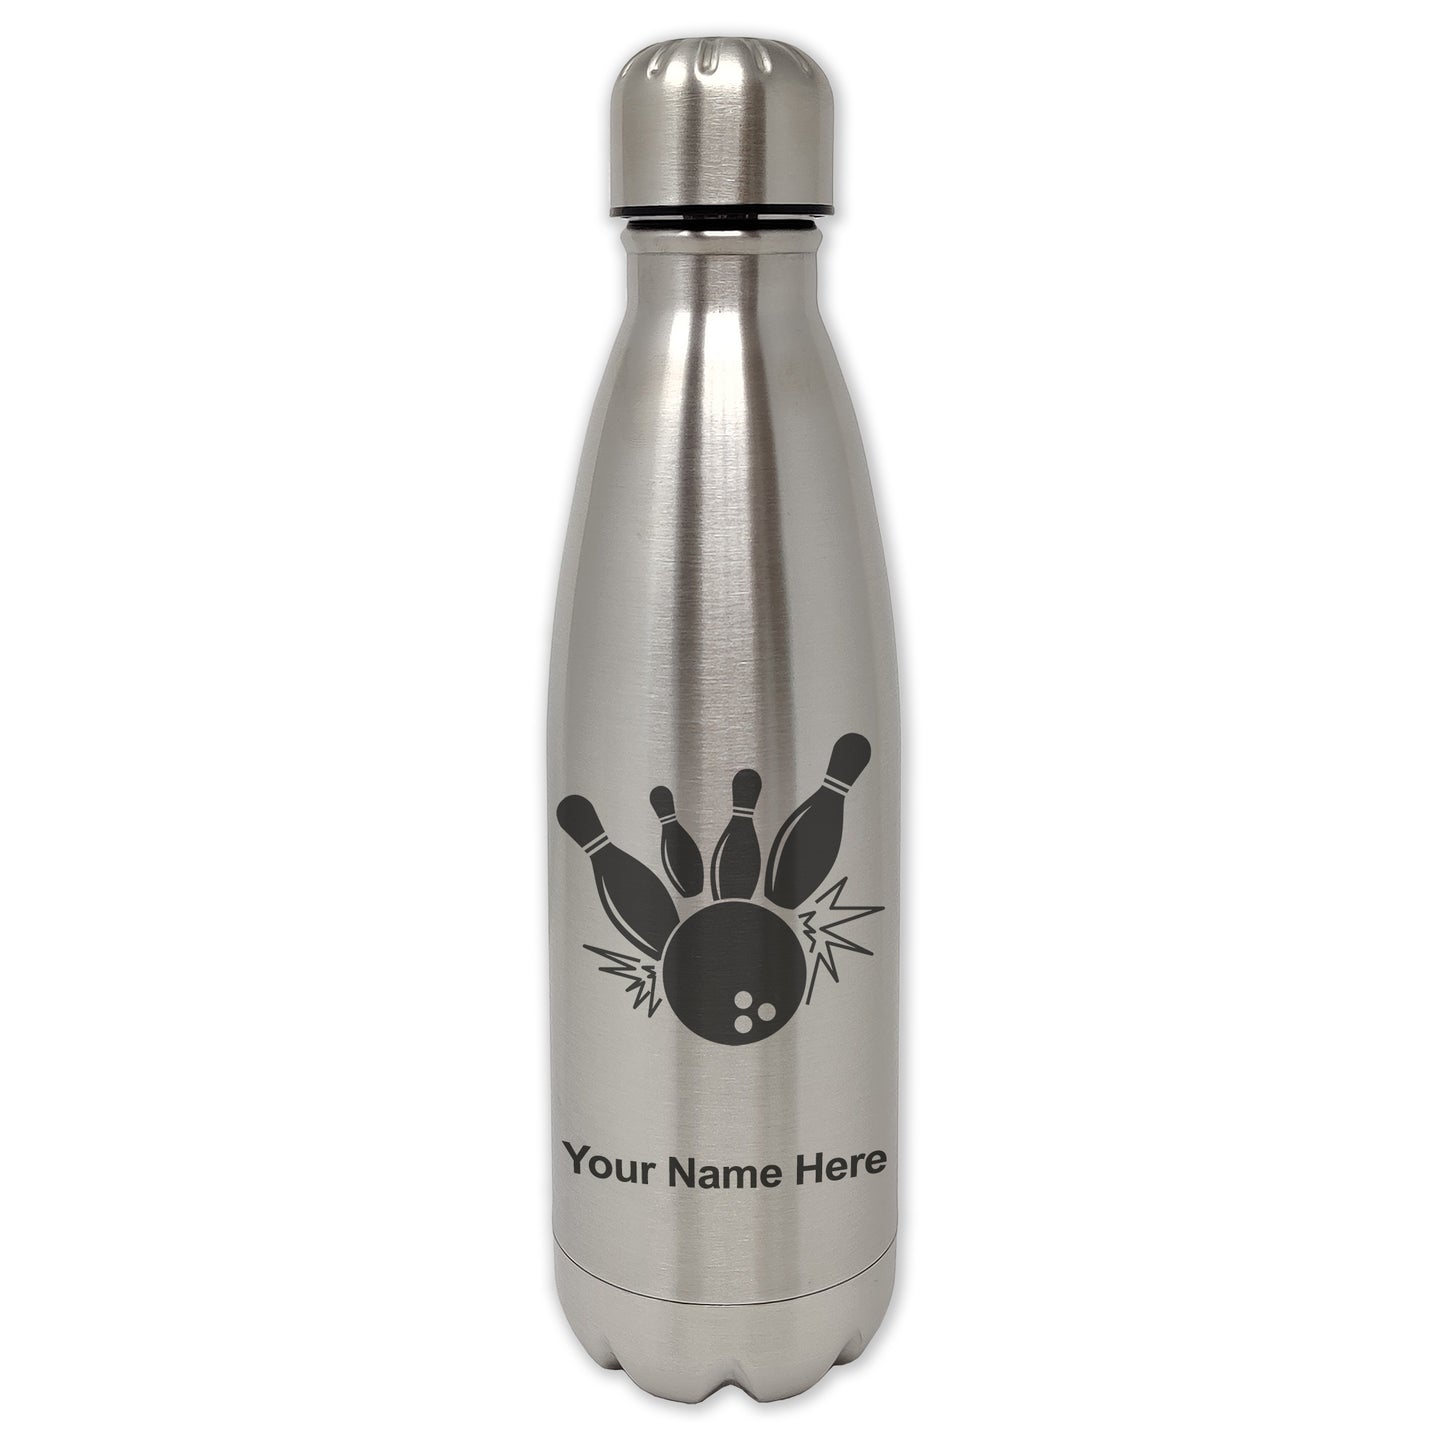 LaserGram Single Wall Water Bottle, Bowling Ball and Pins, Personalized Engraving Included